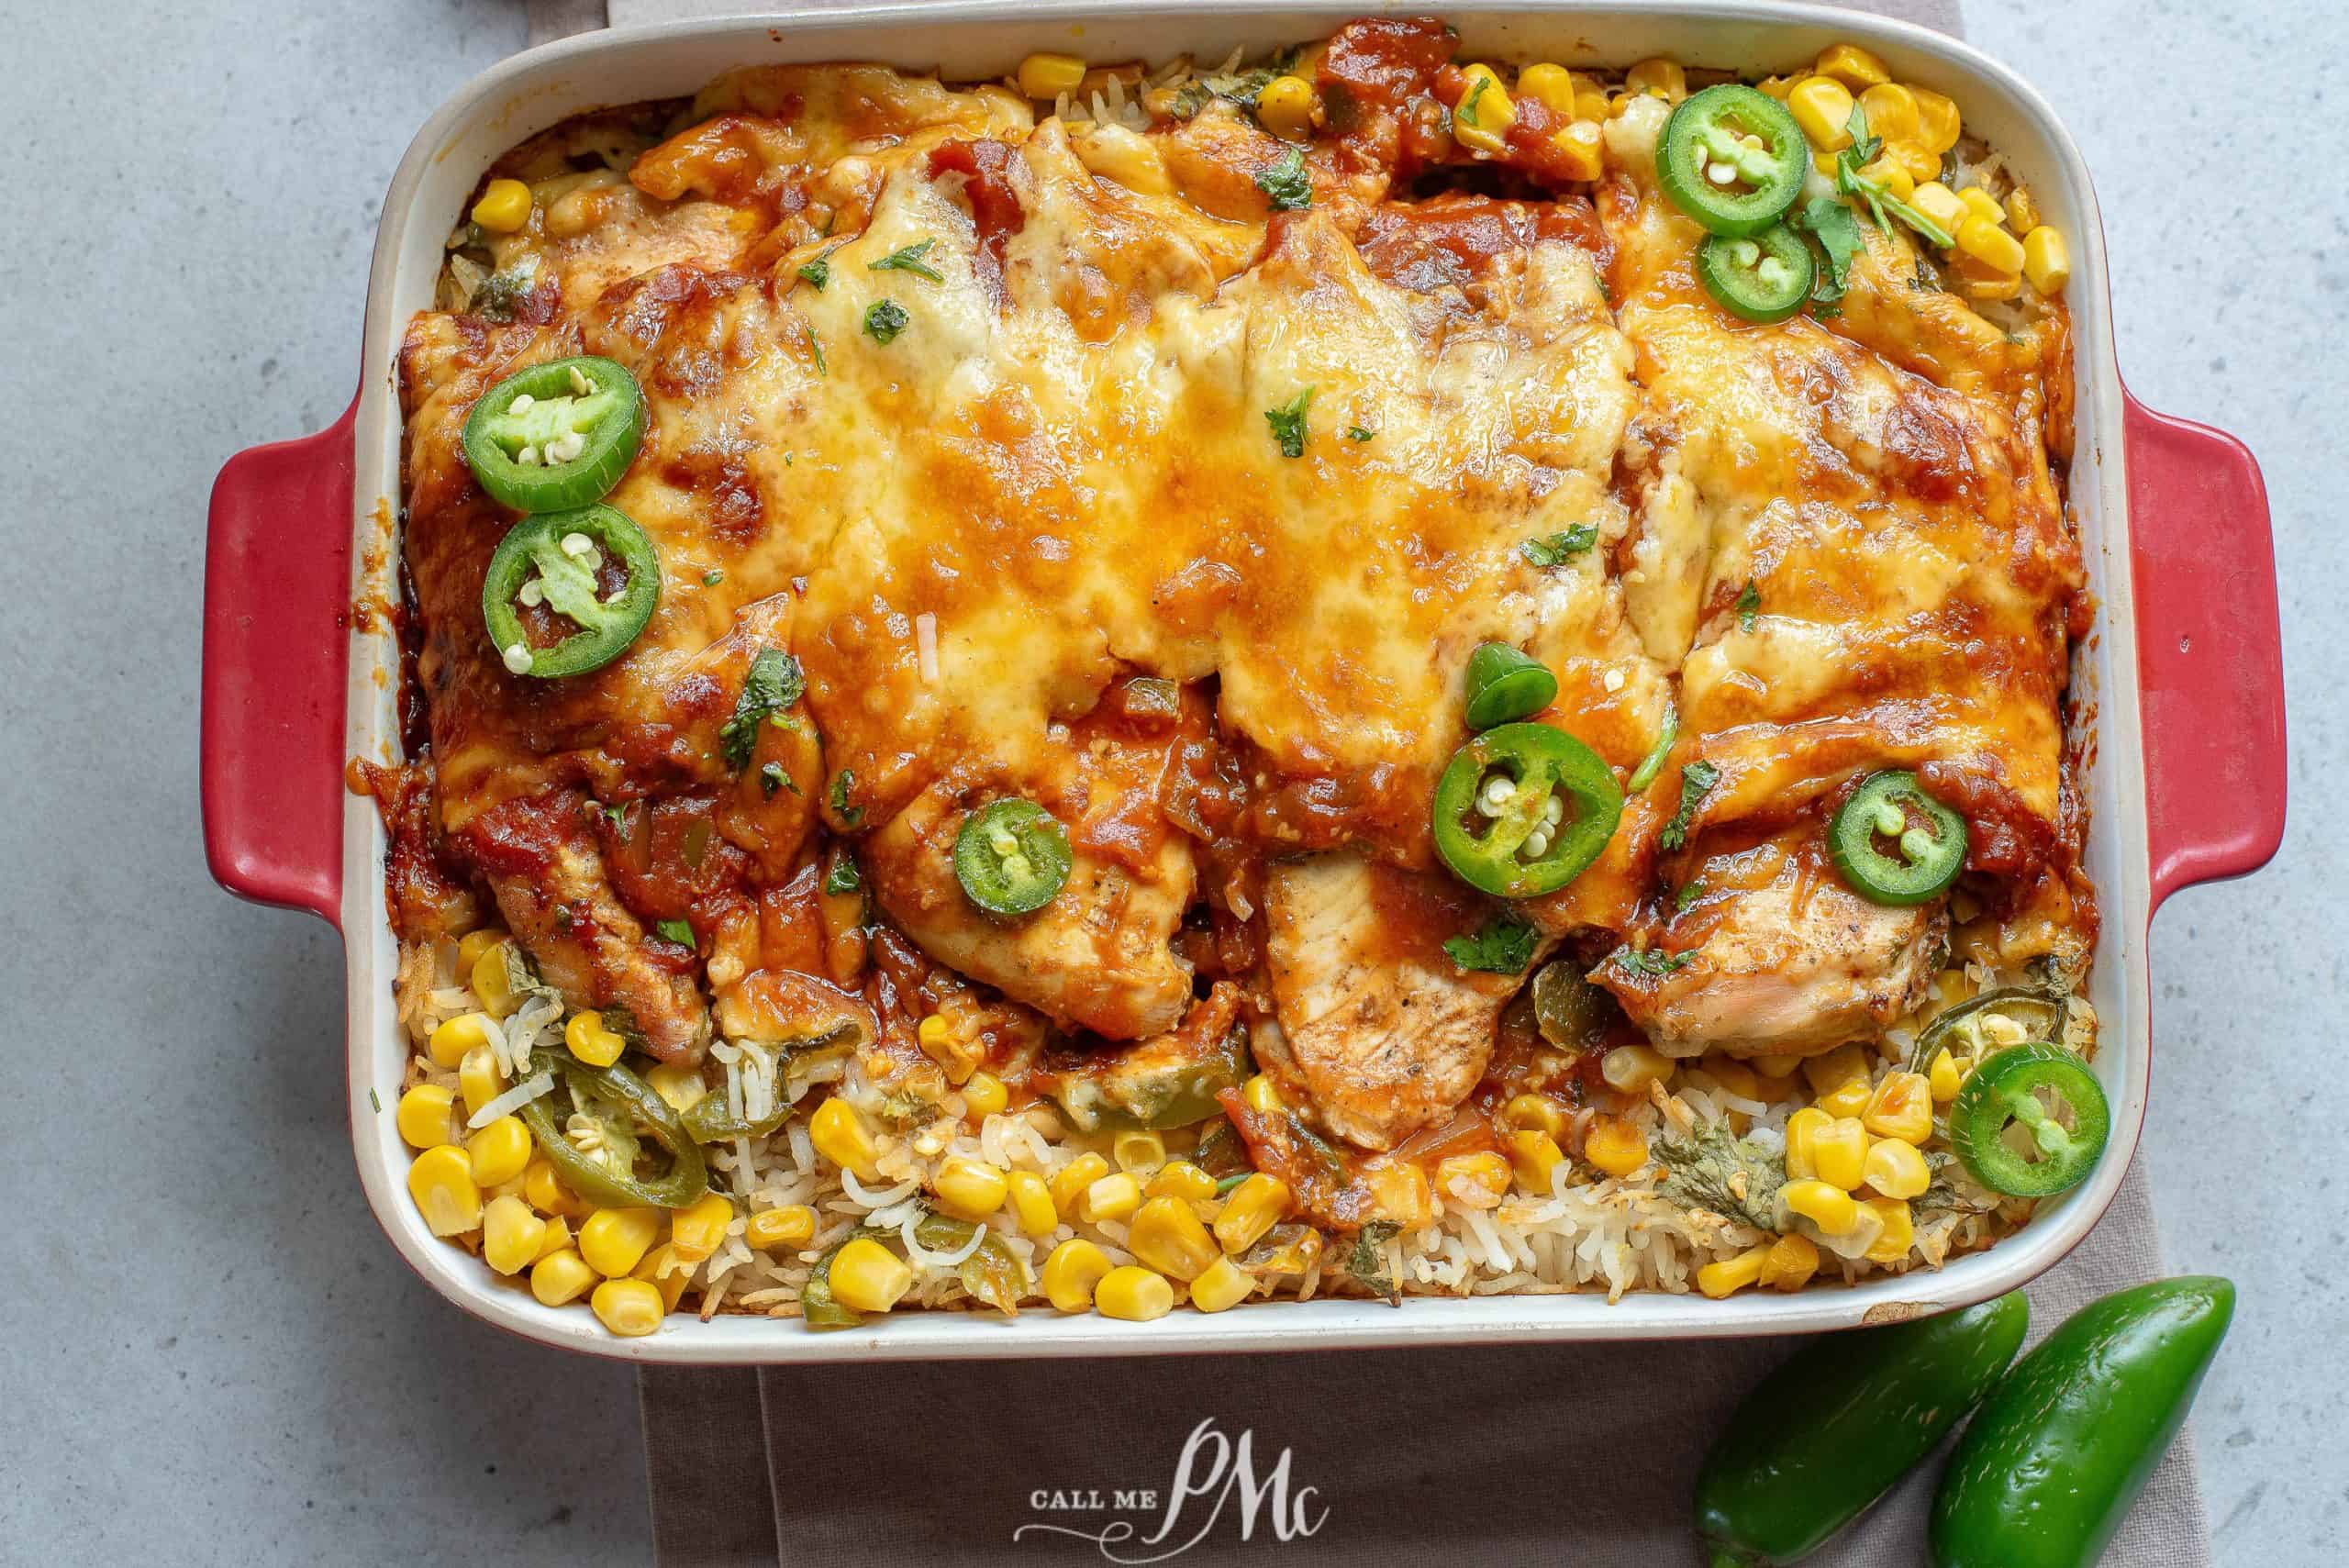 Chicken enchilada casserole with corn and jalapenos.